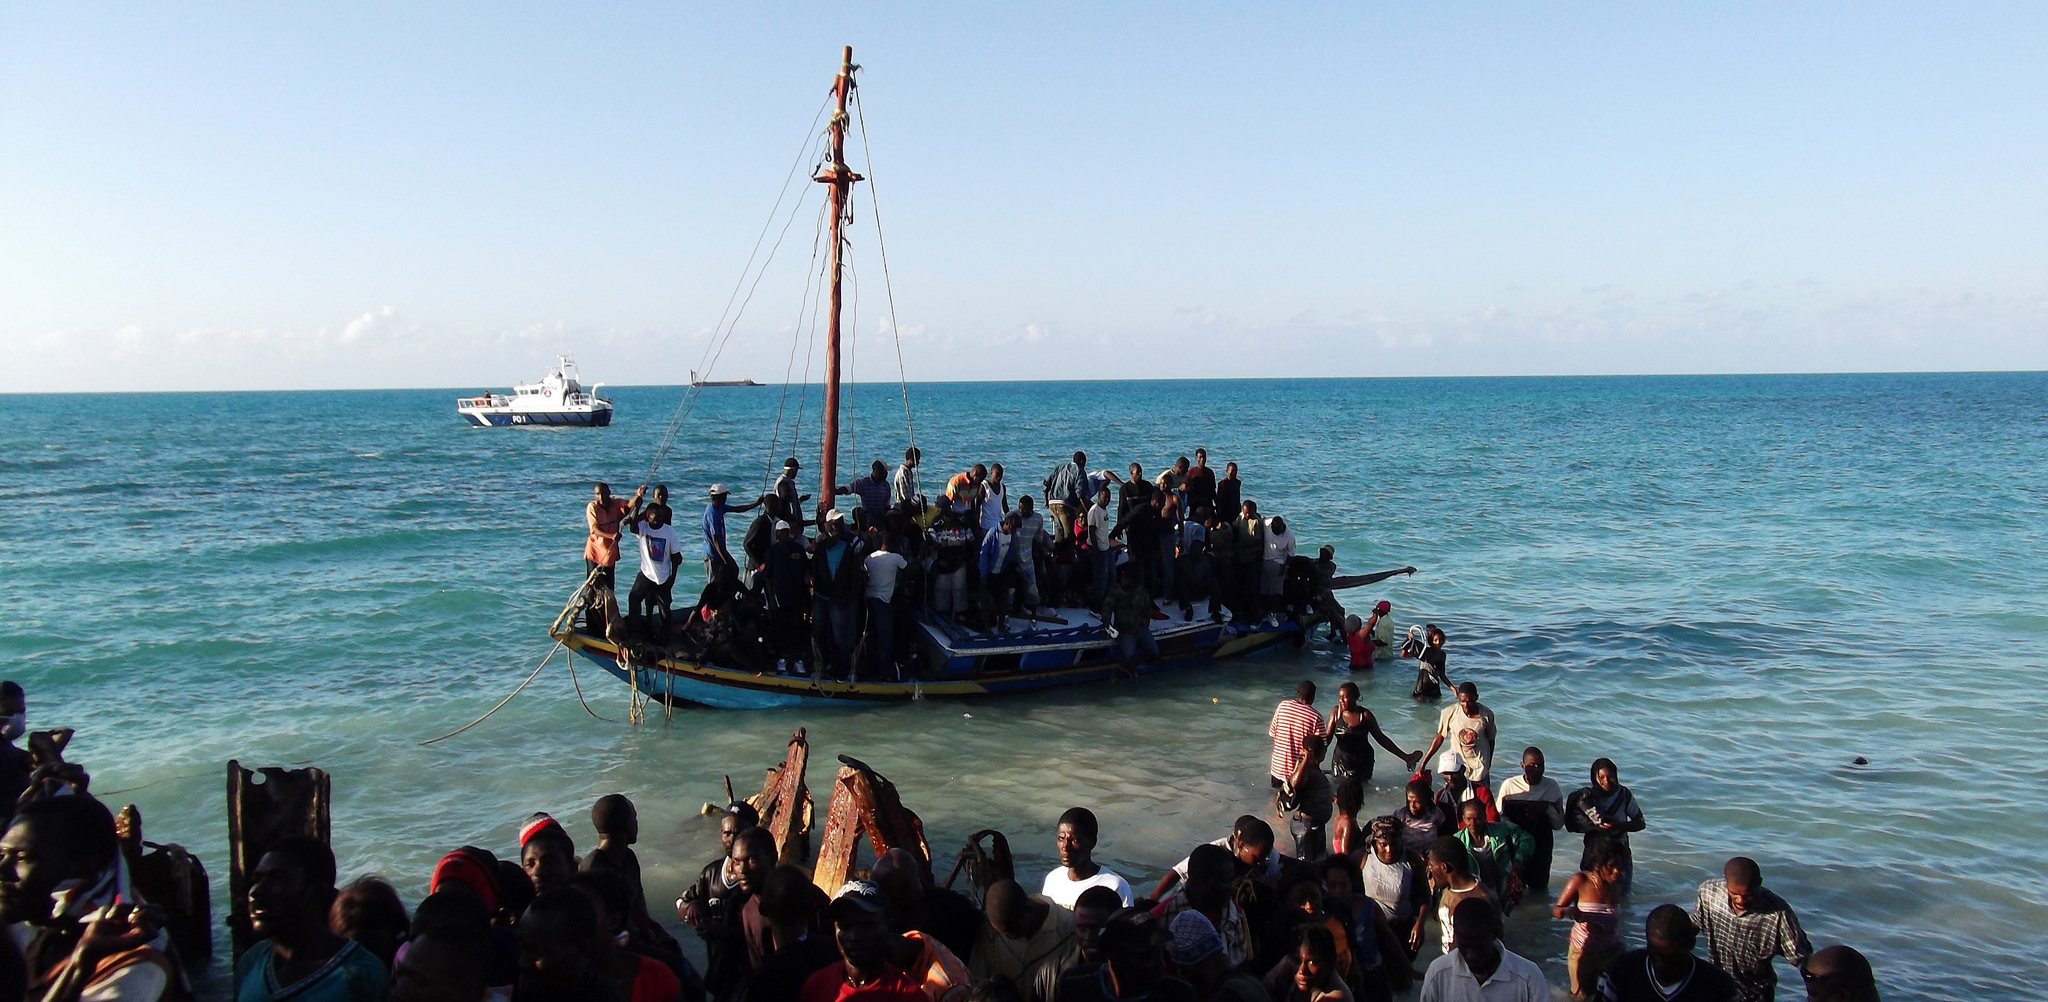 Refugees on a boat at sea